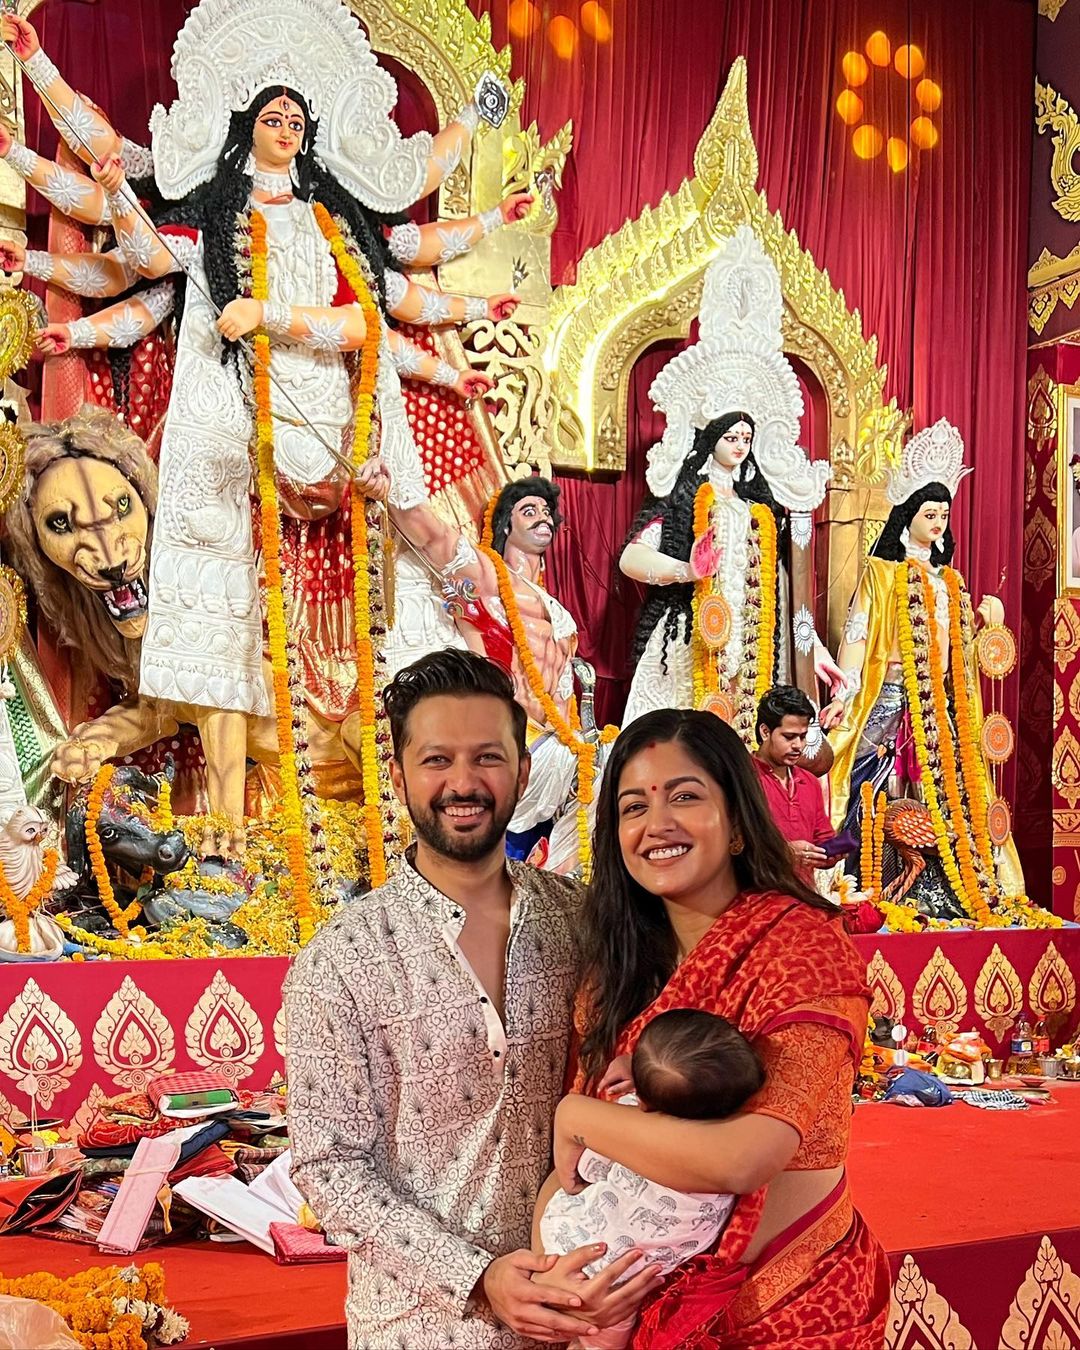 Celebrities Ishita Dutta And Vatsal Sheth Celebrated Durga Pooja First Time With Their Son Vaayu. They Shared Adorable Pictures Of The Celebration On Instagram. 